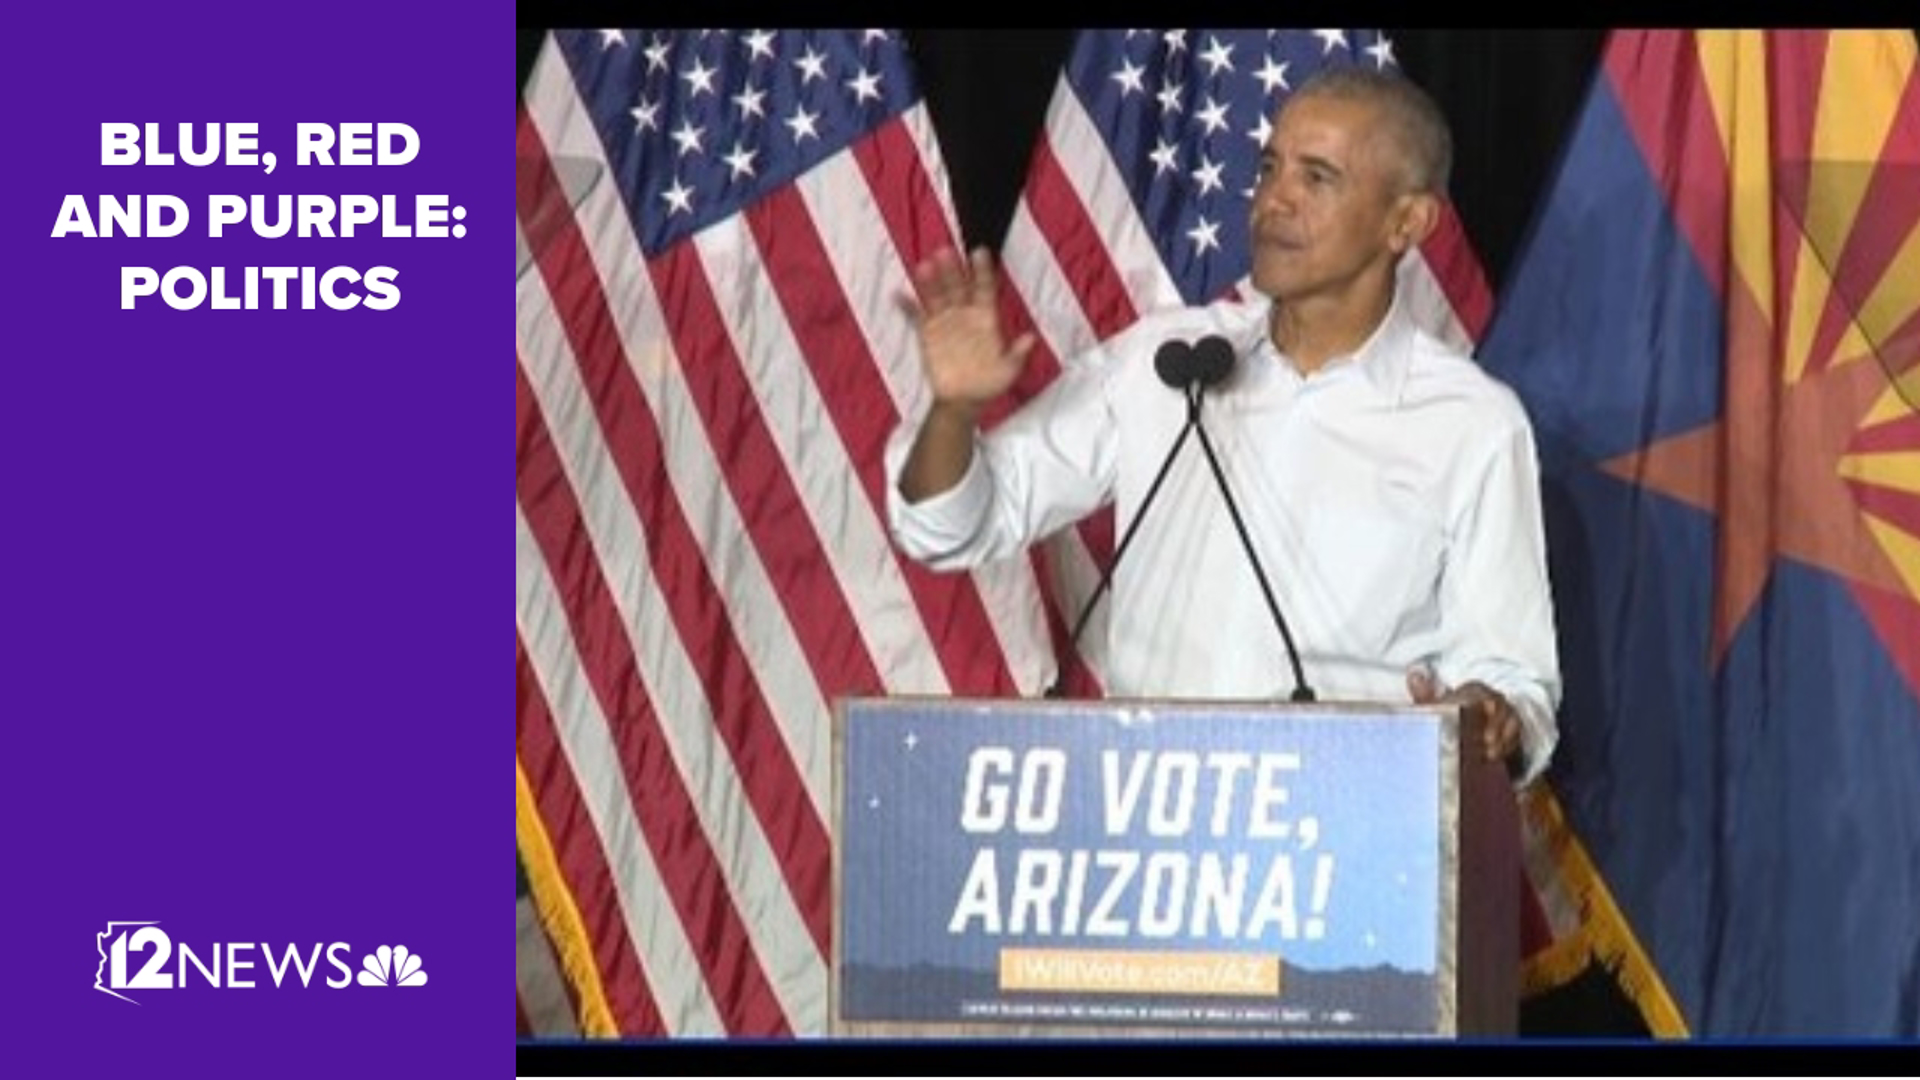 President Obama spoke in front of a packed house in Phoenix to support Mark Kelly and Katie Hobbs.